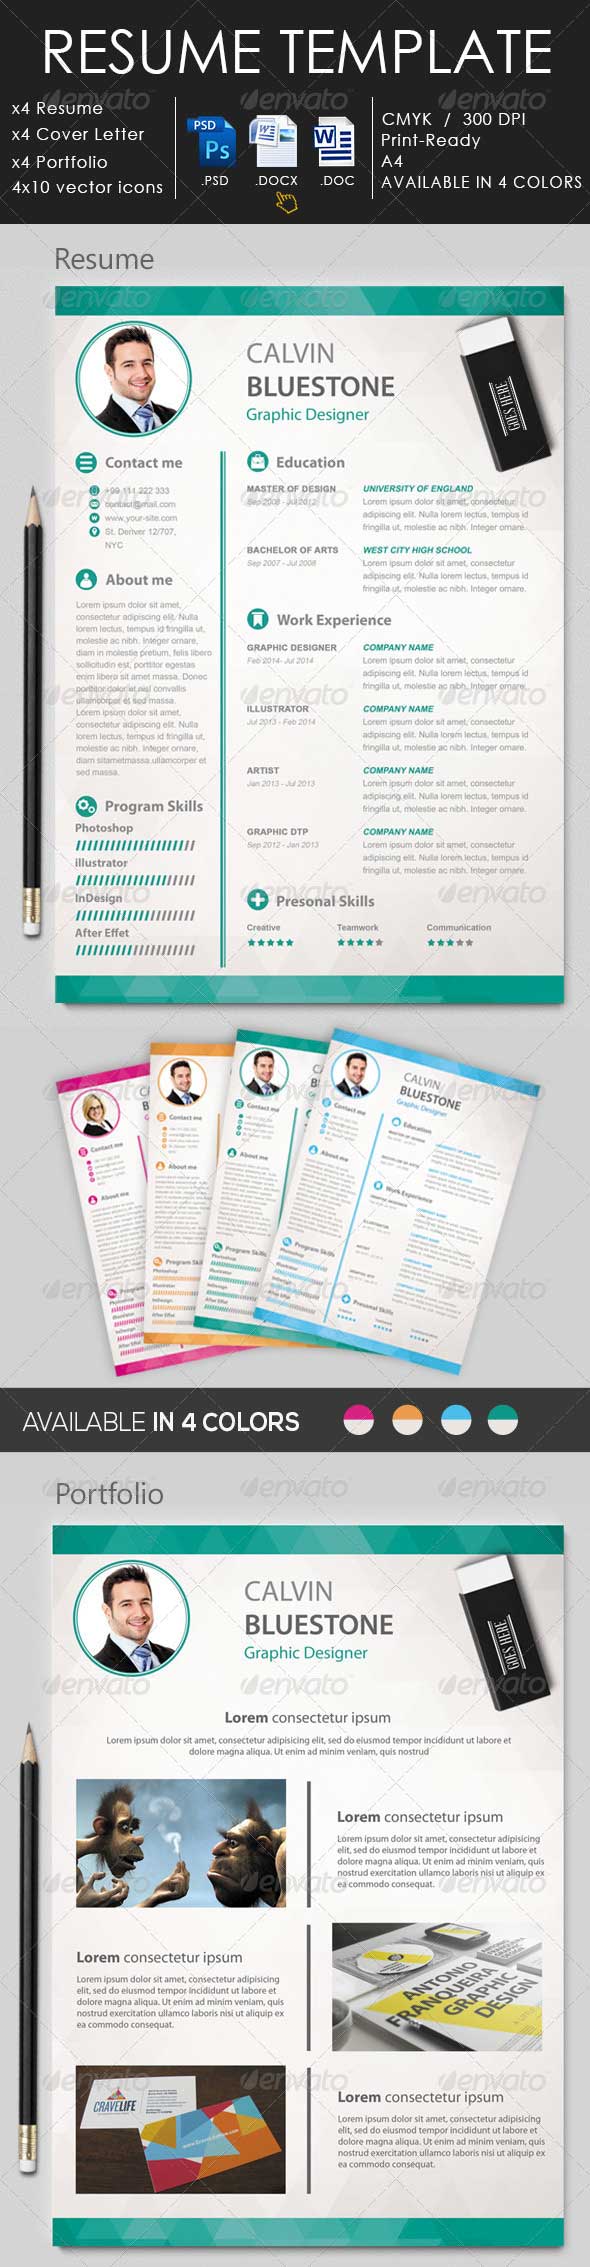 printable-resume-template-psd-download